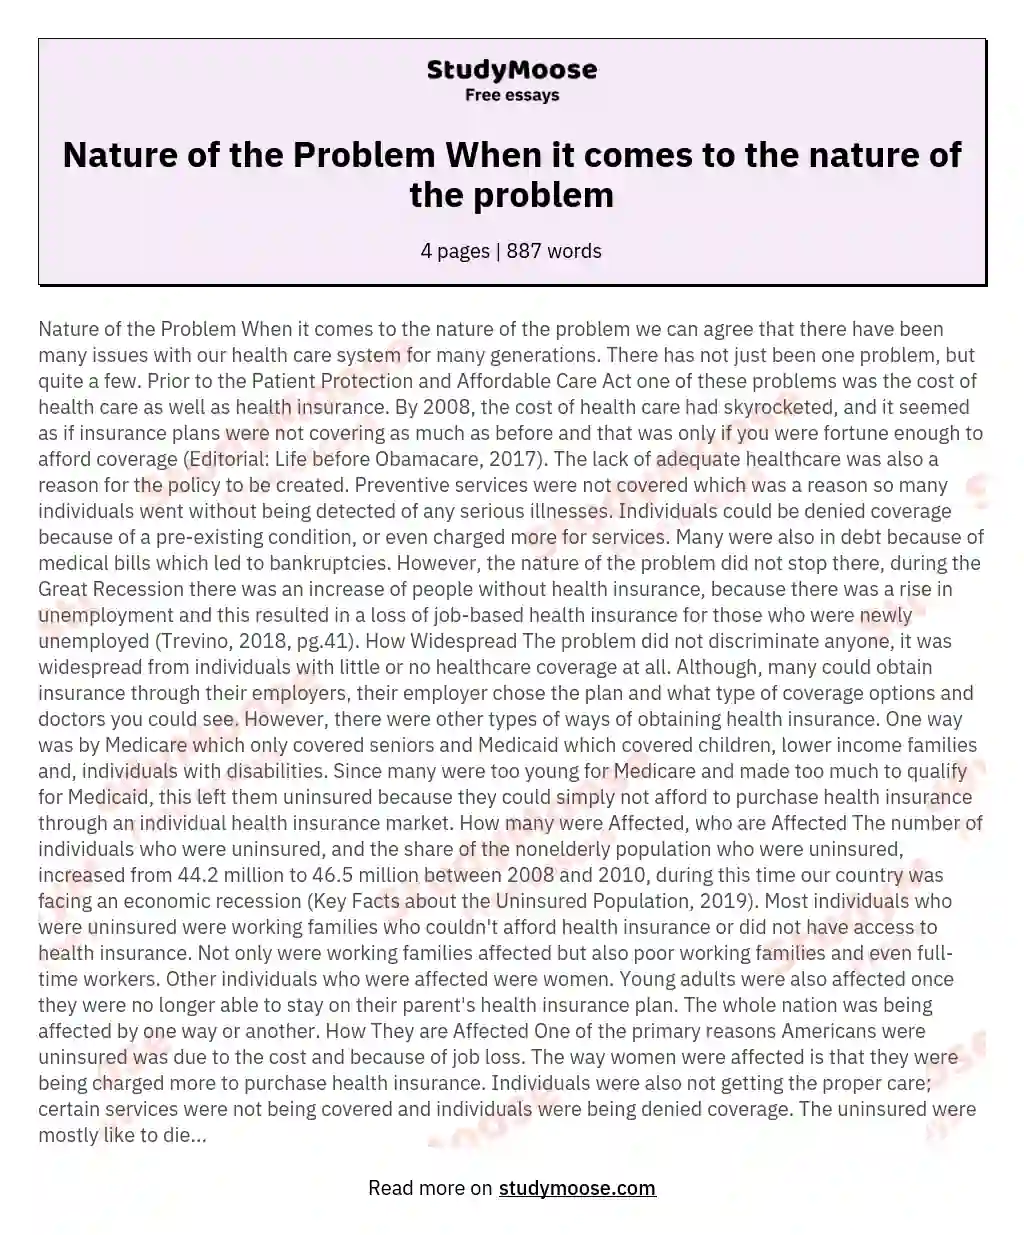 Nature of the Problem When it comes to the nature of the problem